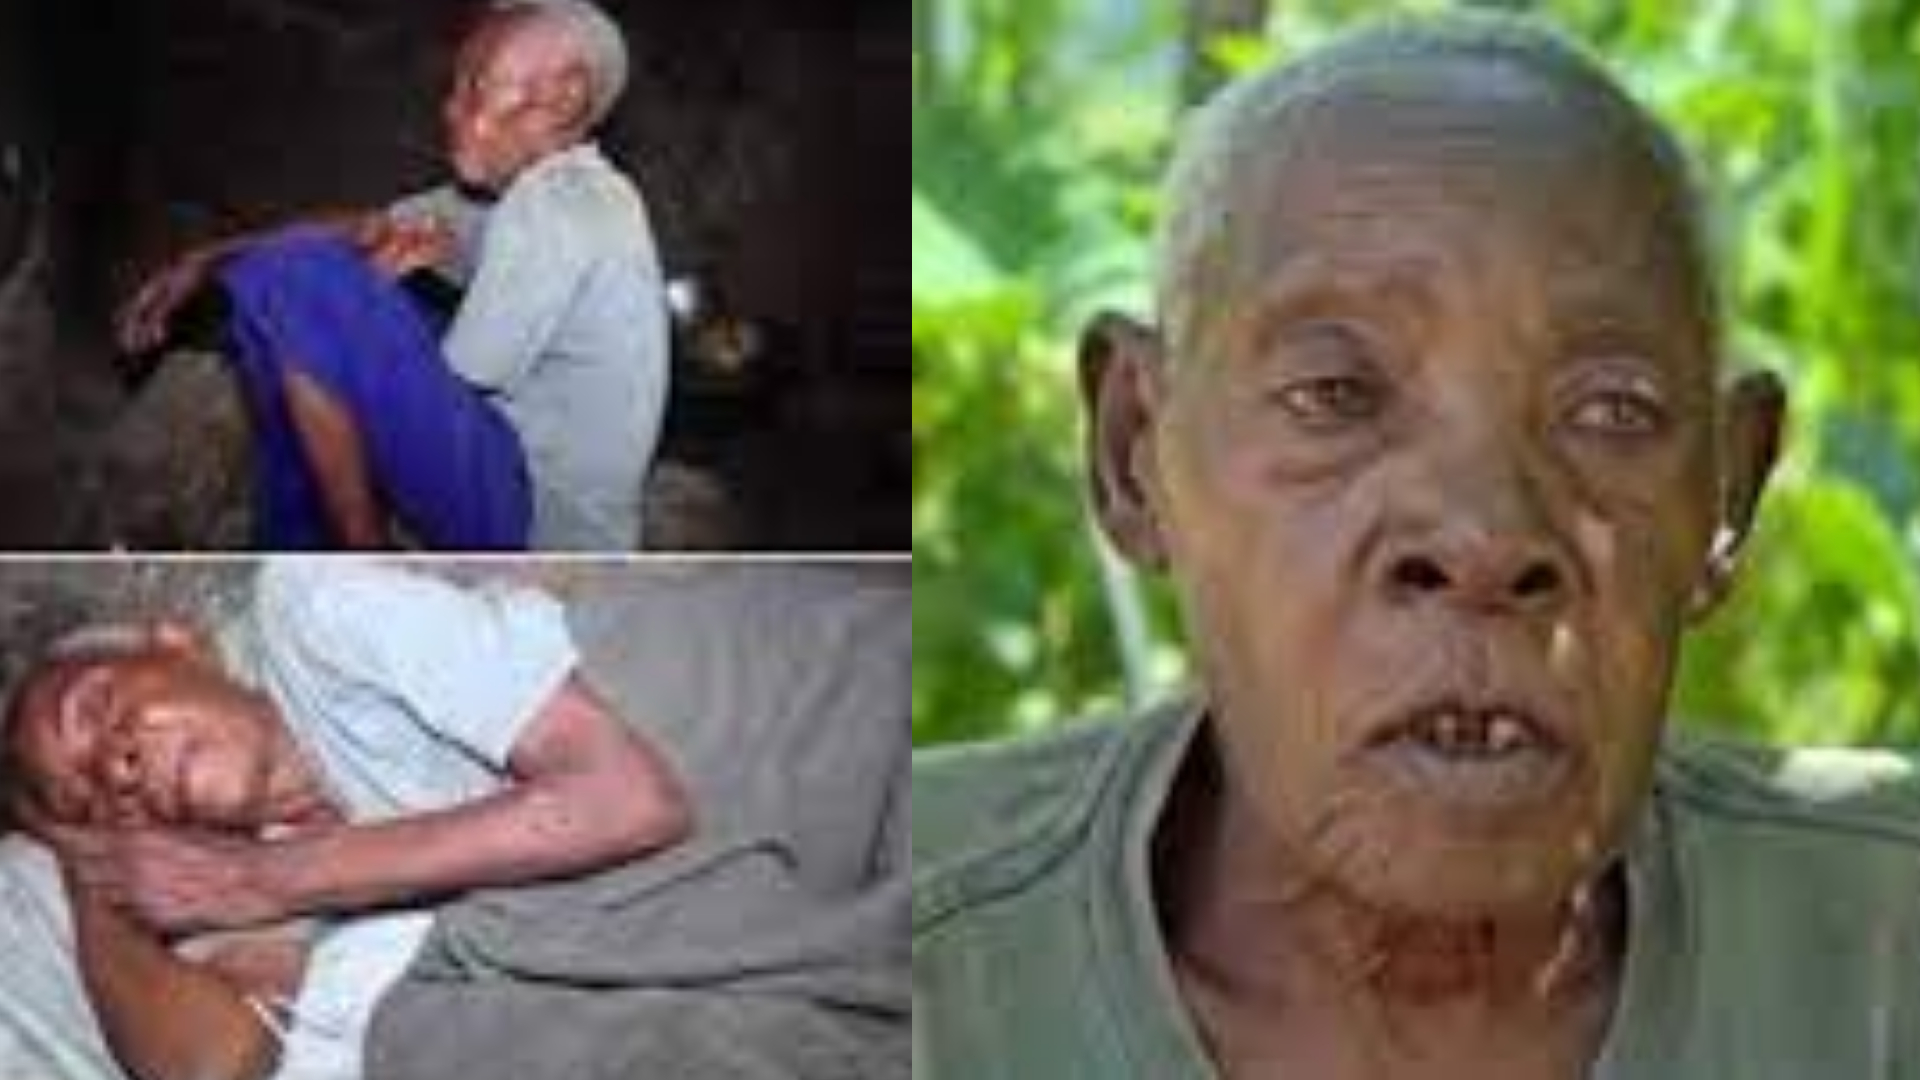 123-Year-Old Woman Seeks Love After a Lifetime of Celibacy